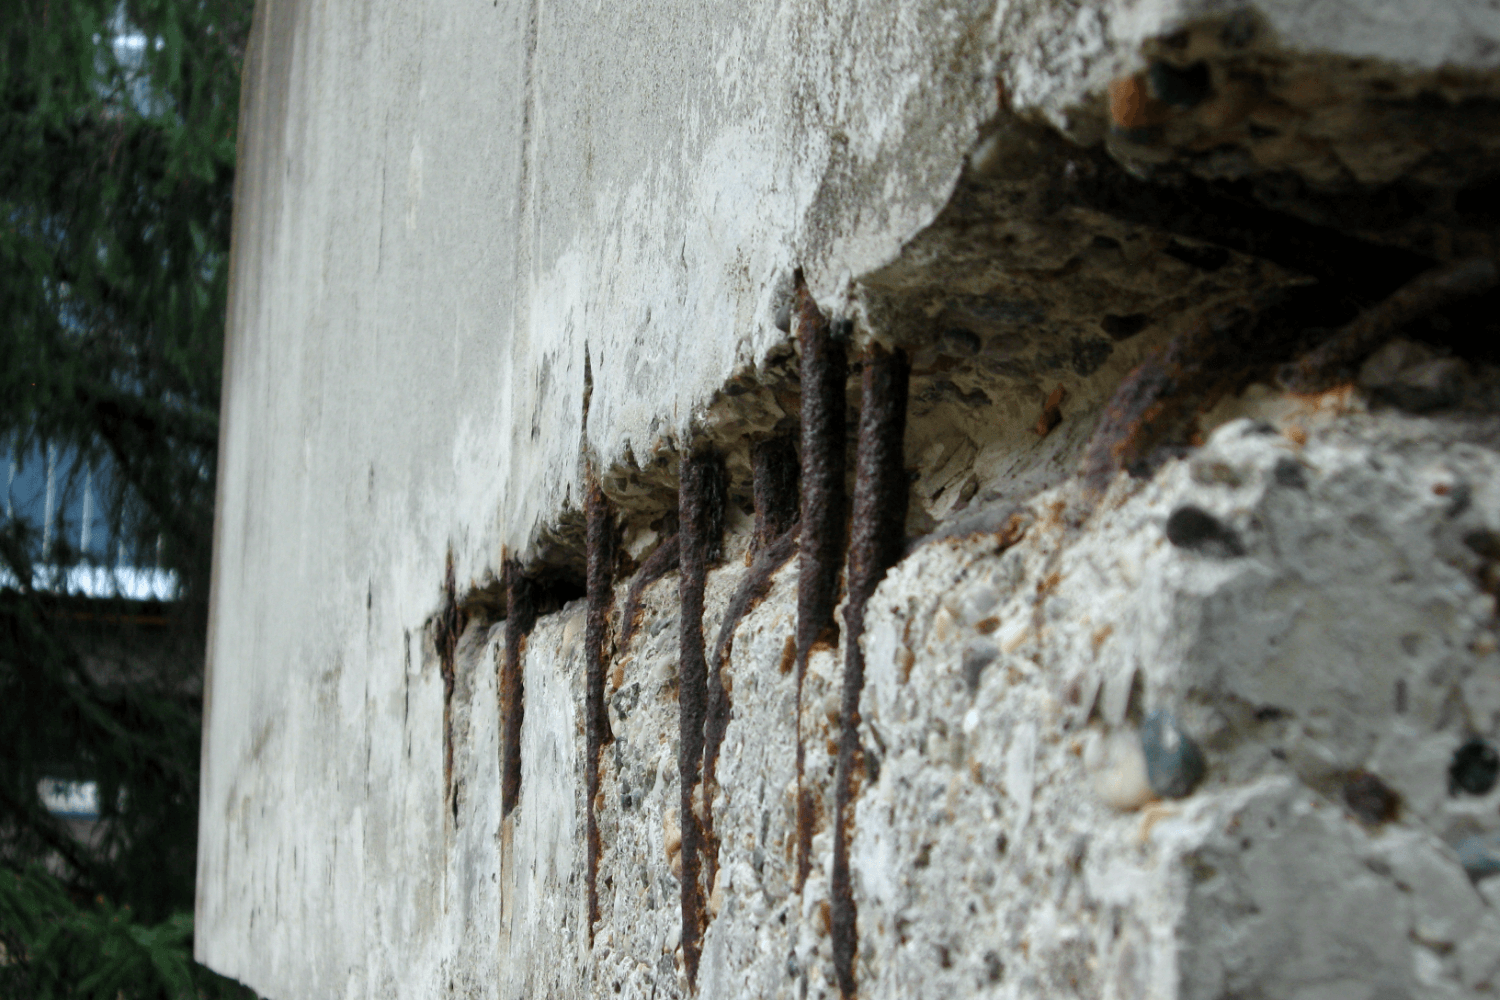 rebar spalling on beam in south florida. concrete restoration needed